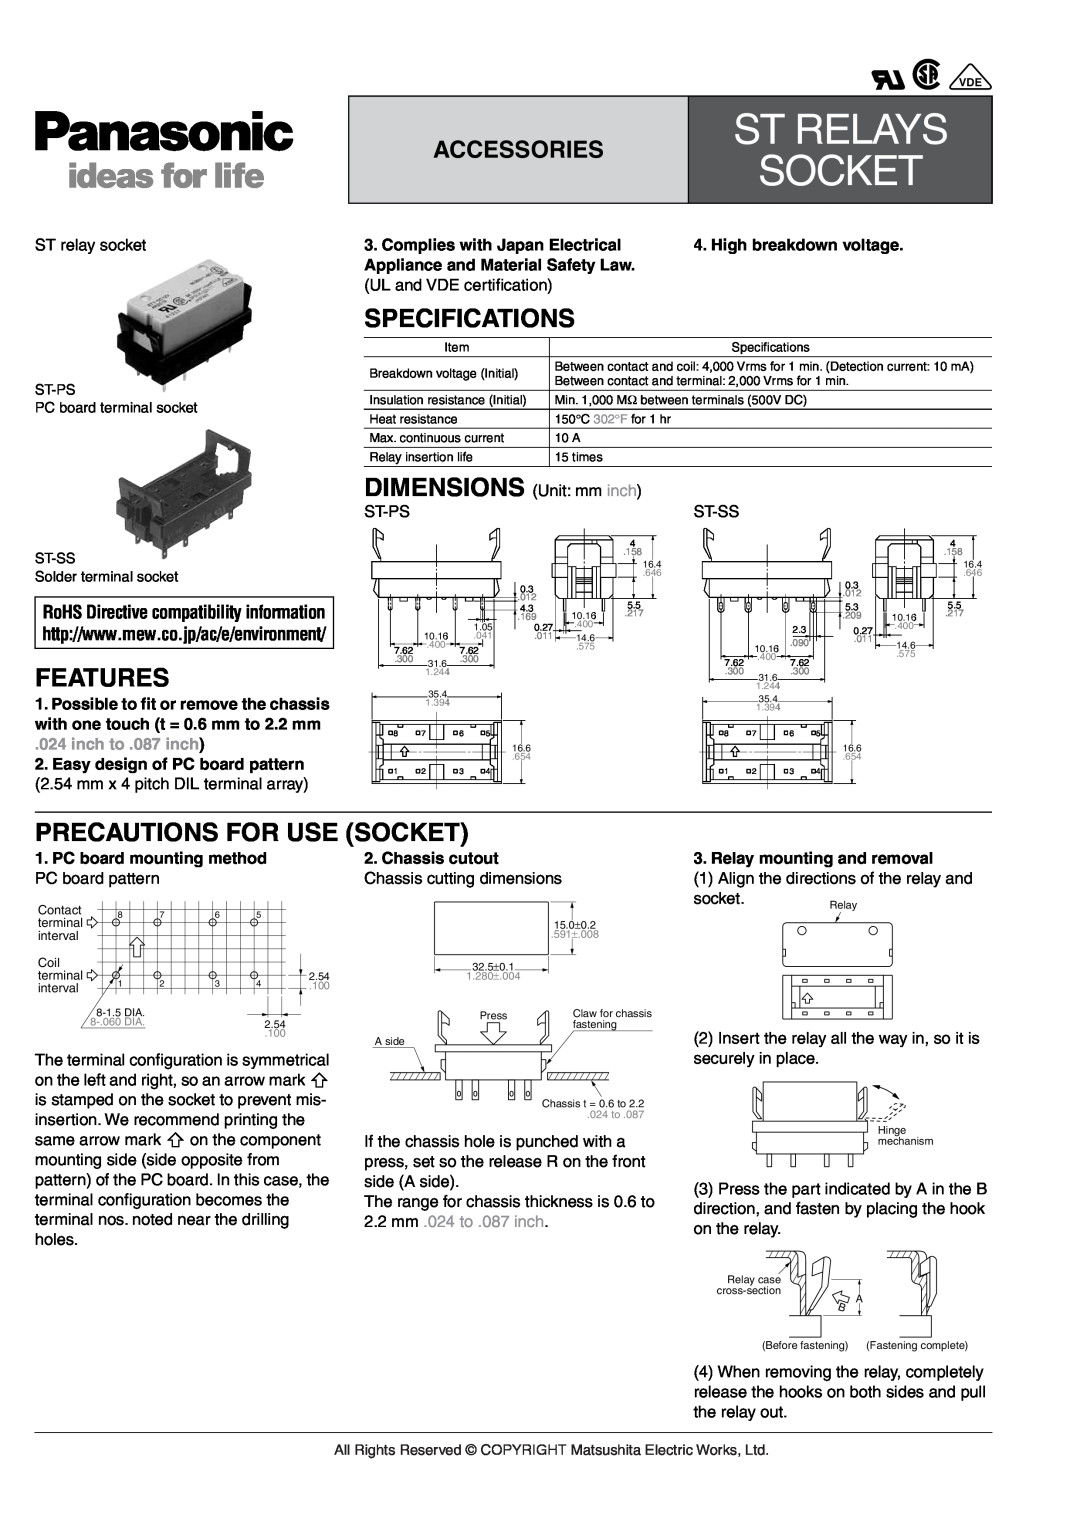 Panasonic IC Drivable PC Board Specifications, DIMENSIONS Unit mm inch, Precautions For Use Socket, Accessories, St Relays 